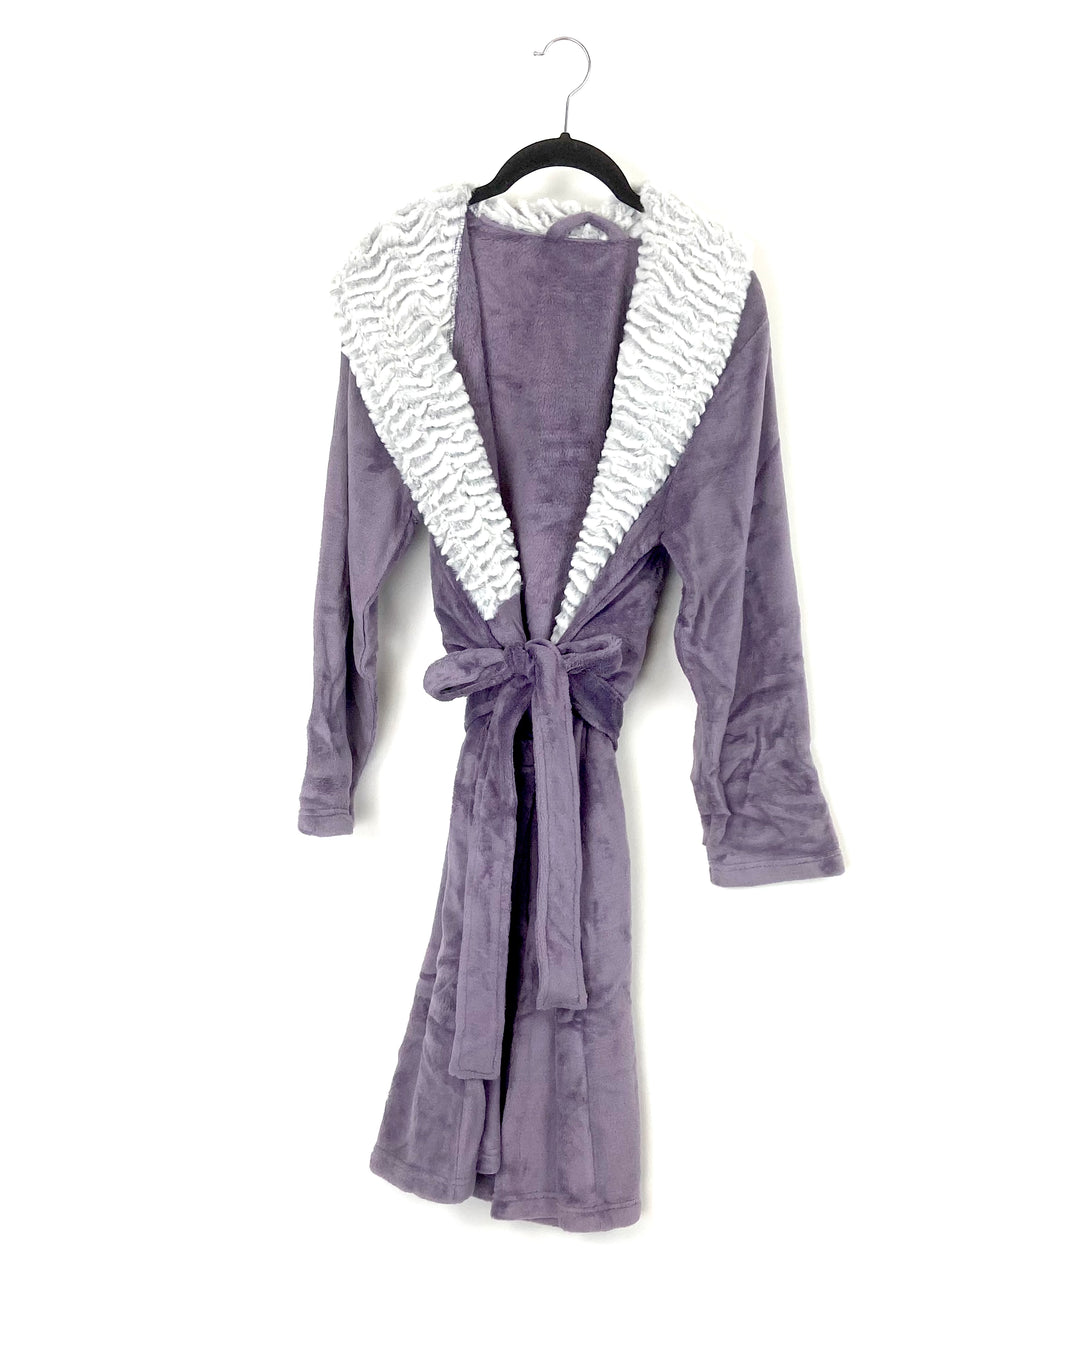 Purple And Gray Faux Fur Robe - Small